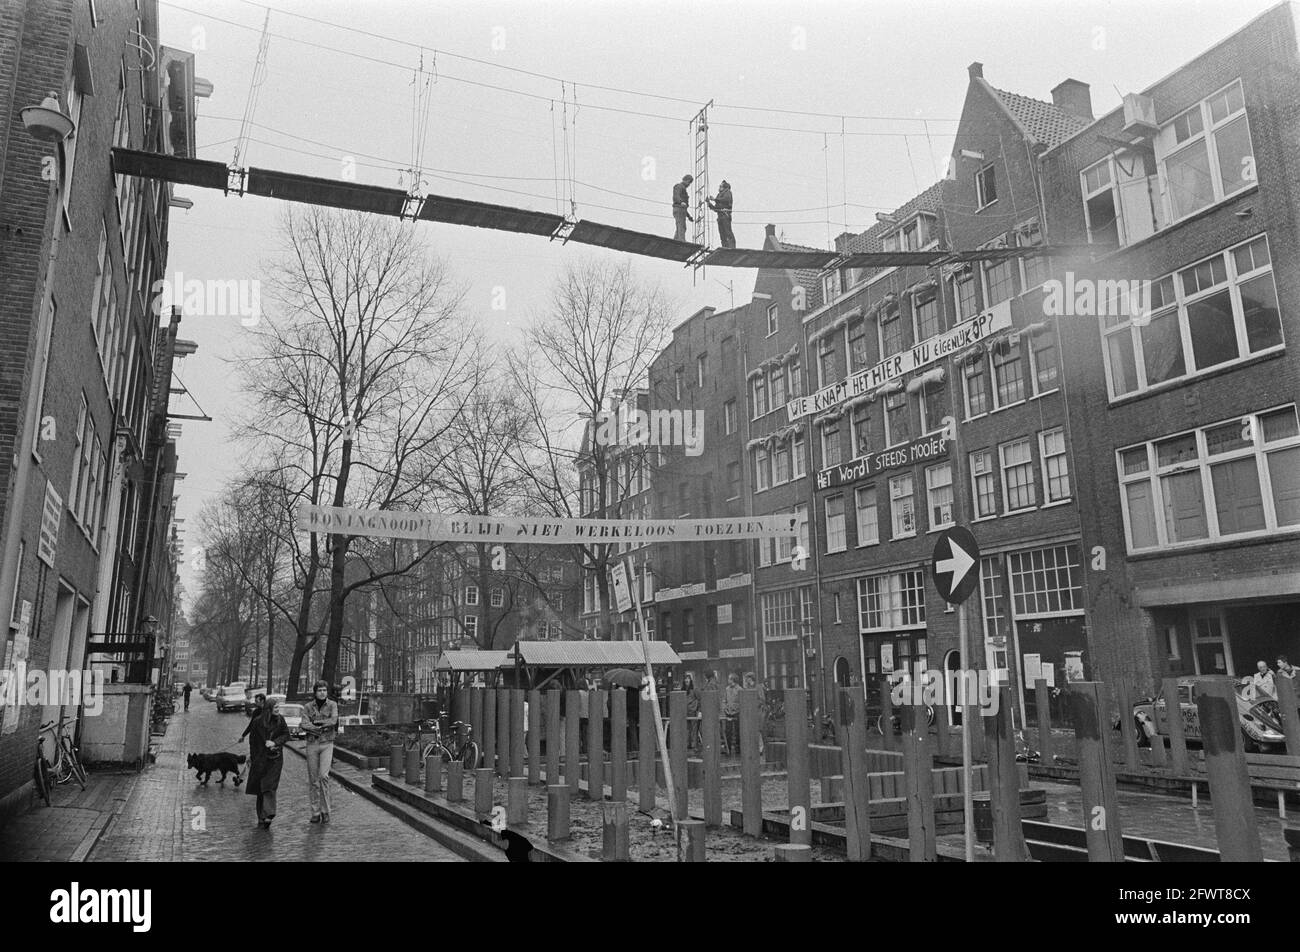 Nieuwmarkt neighborhood; the air bridge over the Recht Boomssloot, March 9, 1975, air bridges, The Netherlands, 20th century press agency photo, news to remember, documentary, historic photography 1945-1990, visual stories, human history of the Twentieth Century, capturing moments in time Stock Photo